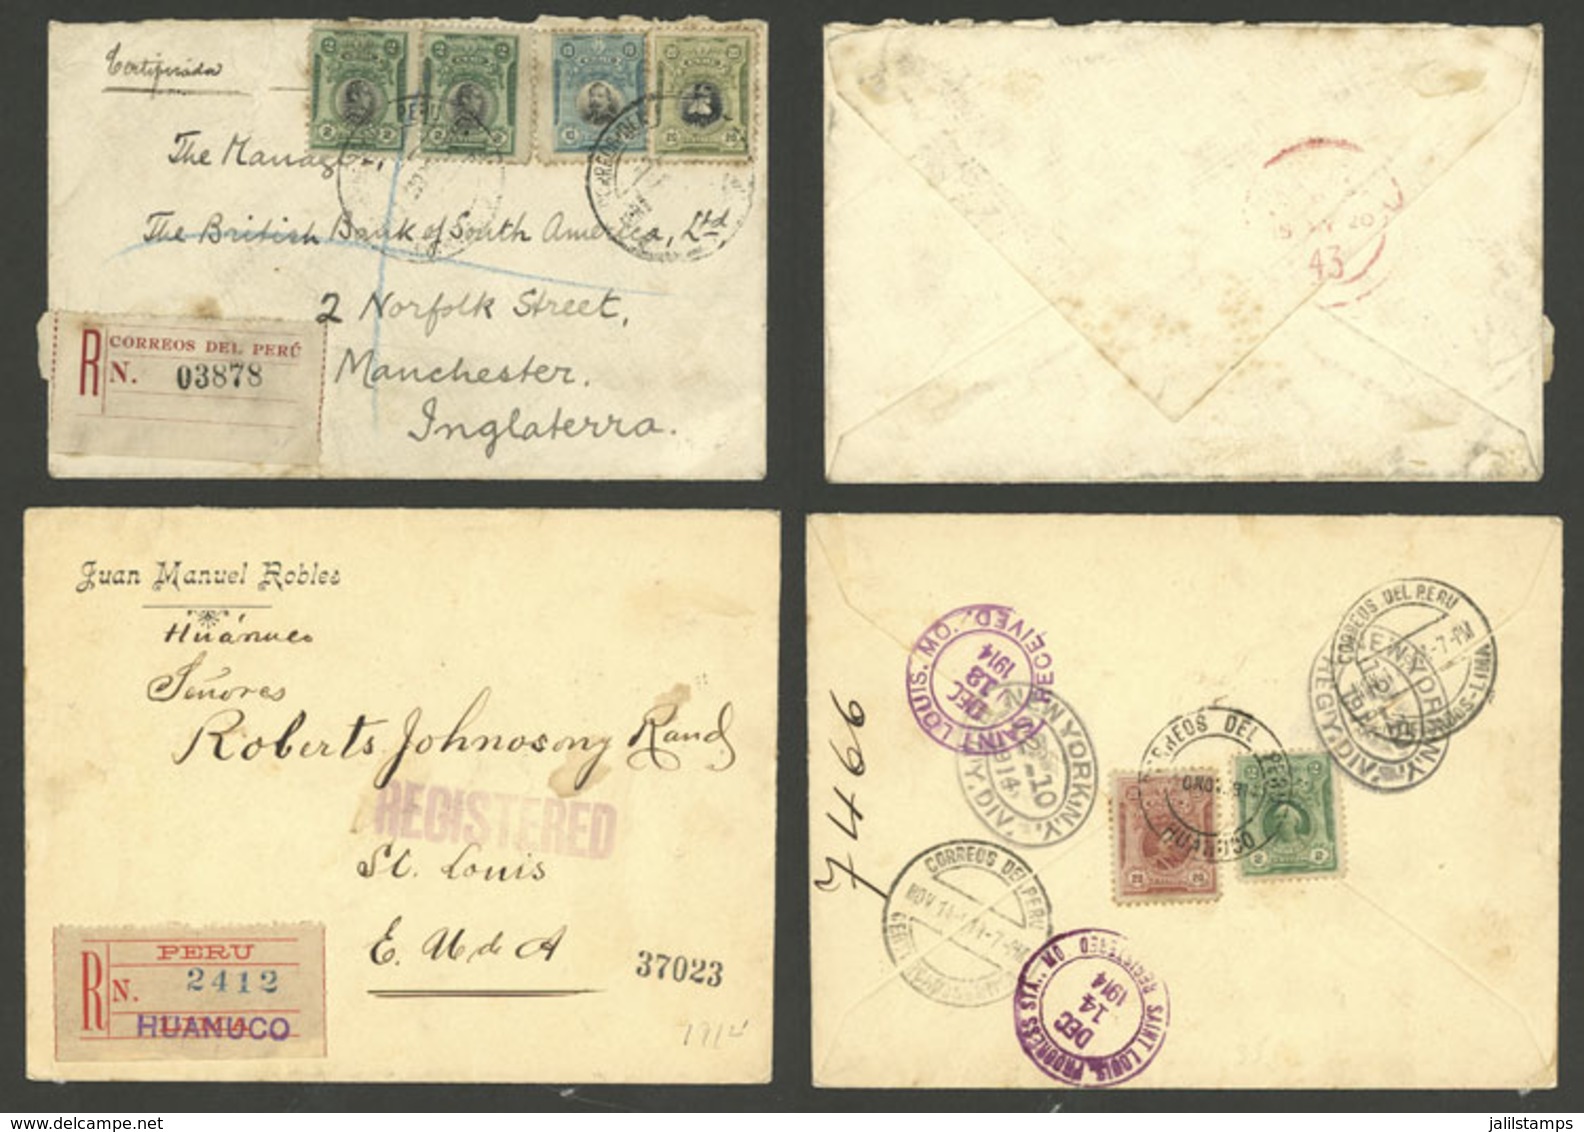 PERU: 2 Registered Covers Sent In 1914 And 1920 From Huanuco And ? To USA And England Through The Panama Canal, Franked  - Peru